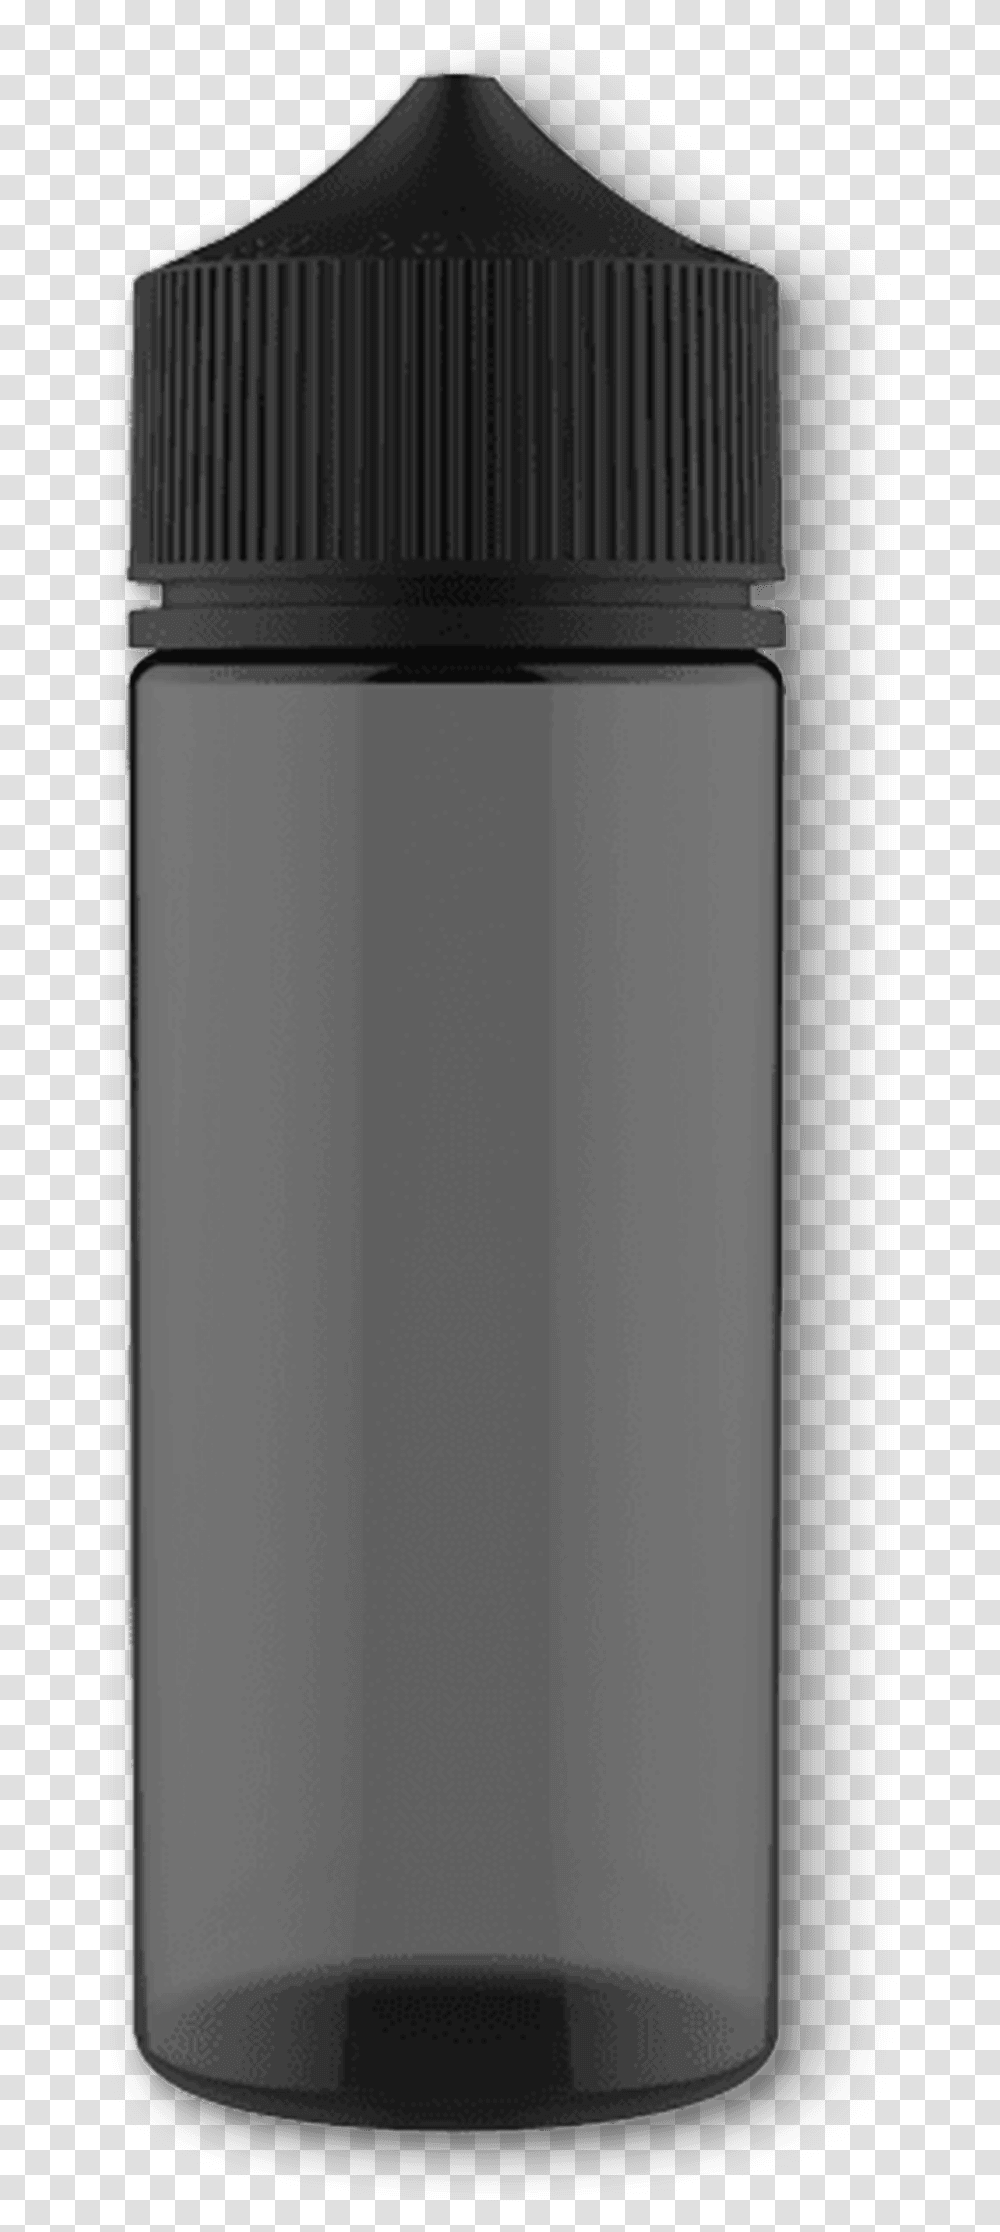 Water Bottle, Mobile Phone, Electronics, Cell Phone, Appliance Transparent Png